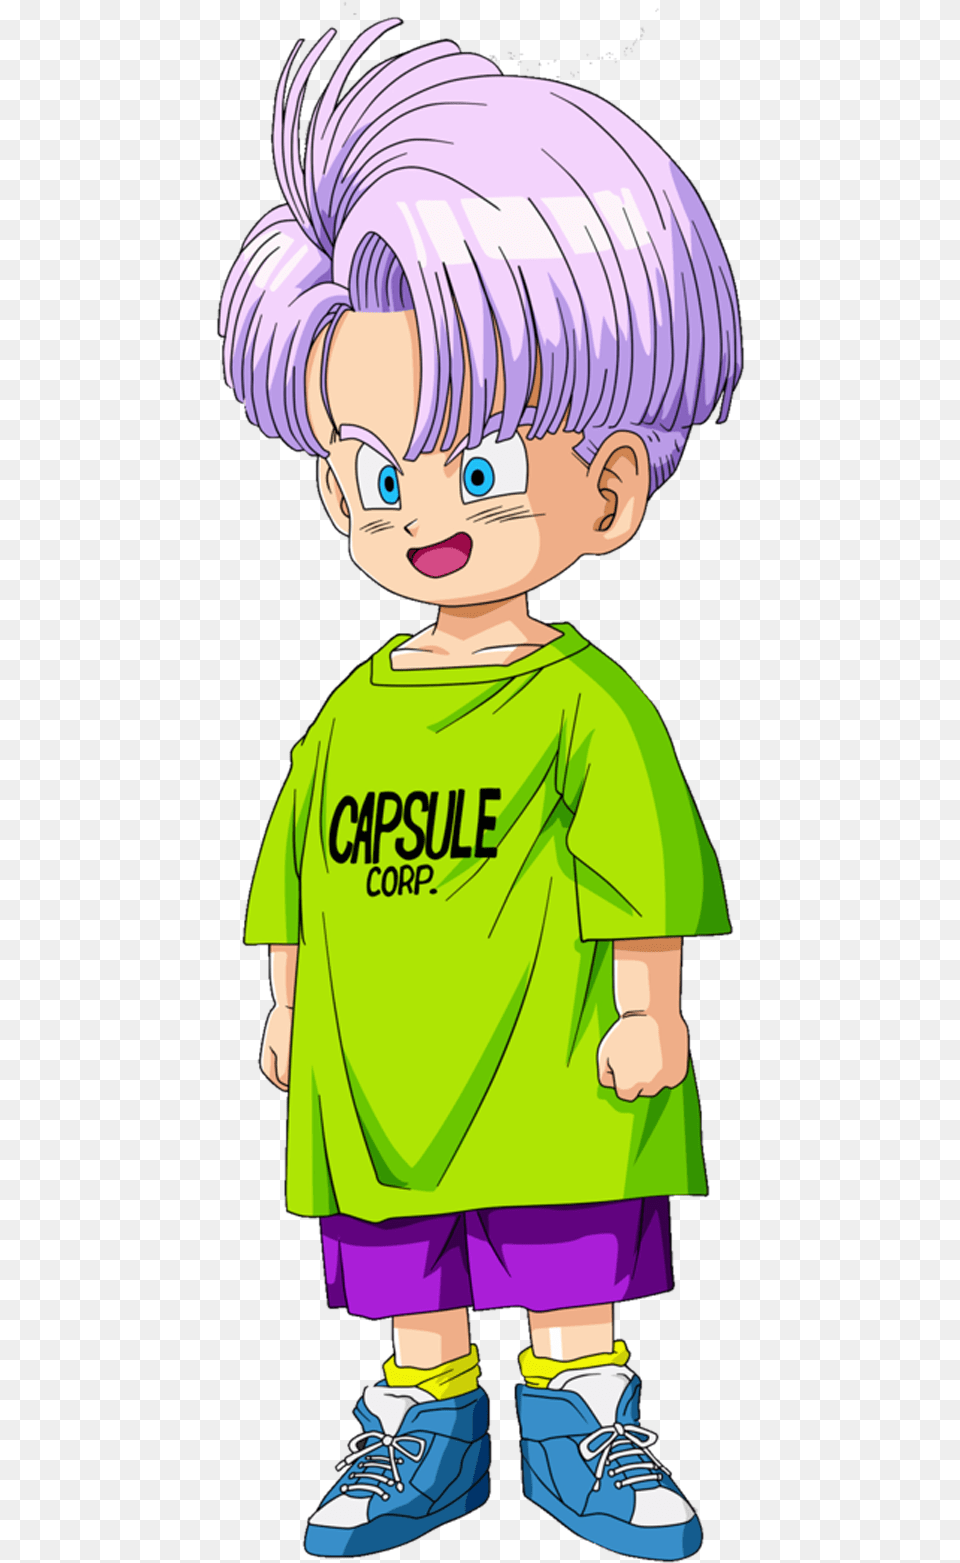 Download Share This Image Dragon Ball Z Trunks Image Kid Trunks Icon, Book, Publication, Comics, Boy Free Transparent Png